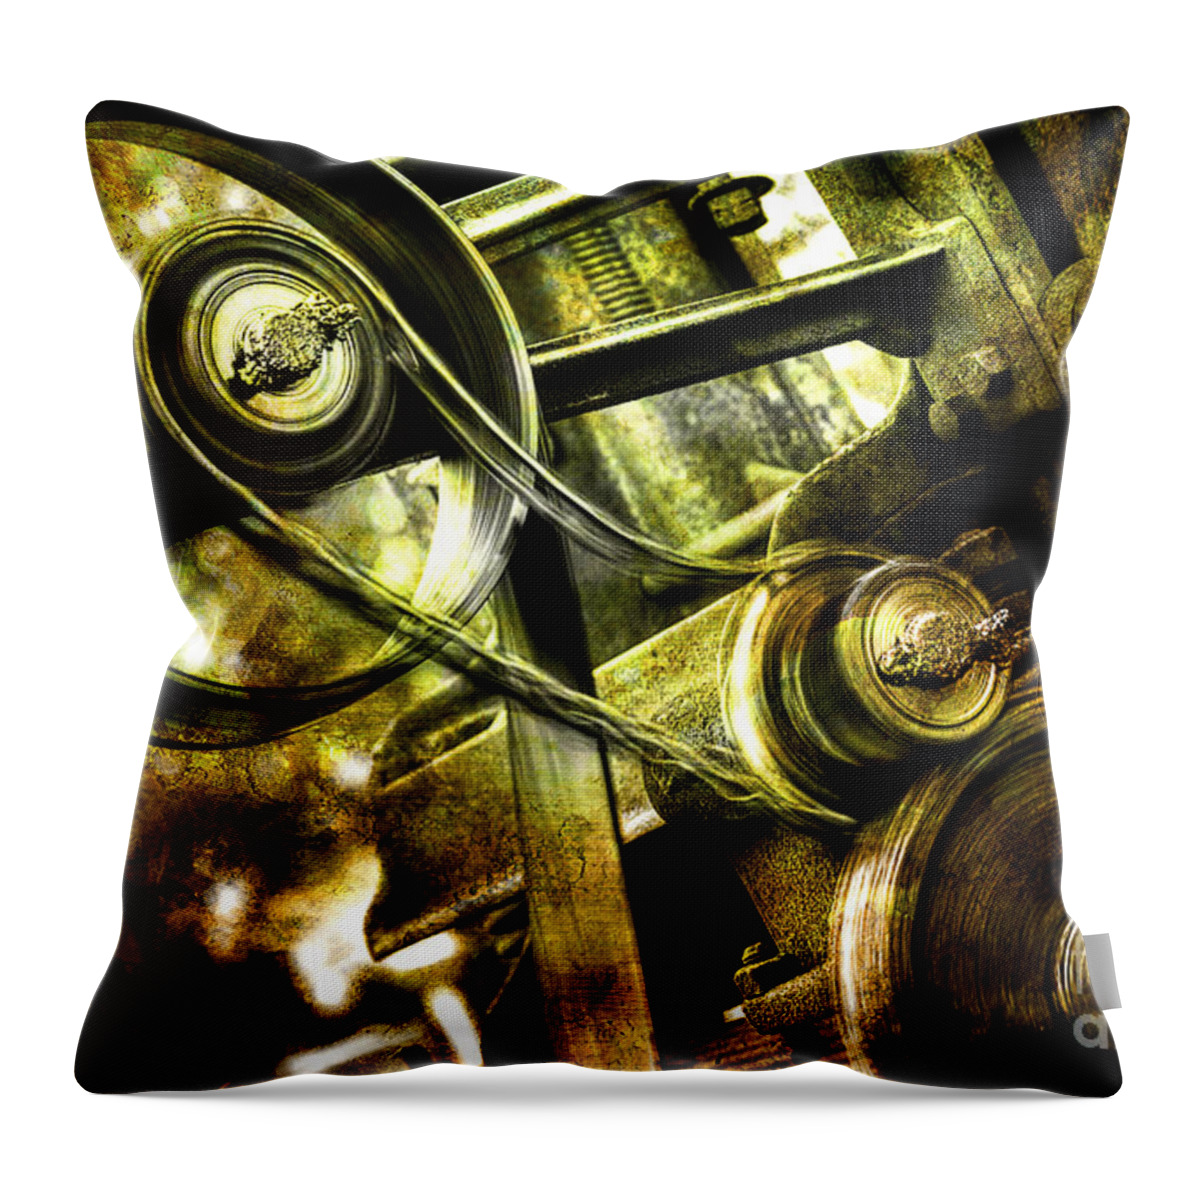 Antique Machinery Throw Pillow featuring the photograph Still Working by Michael Eingle